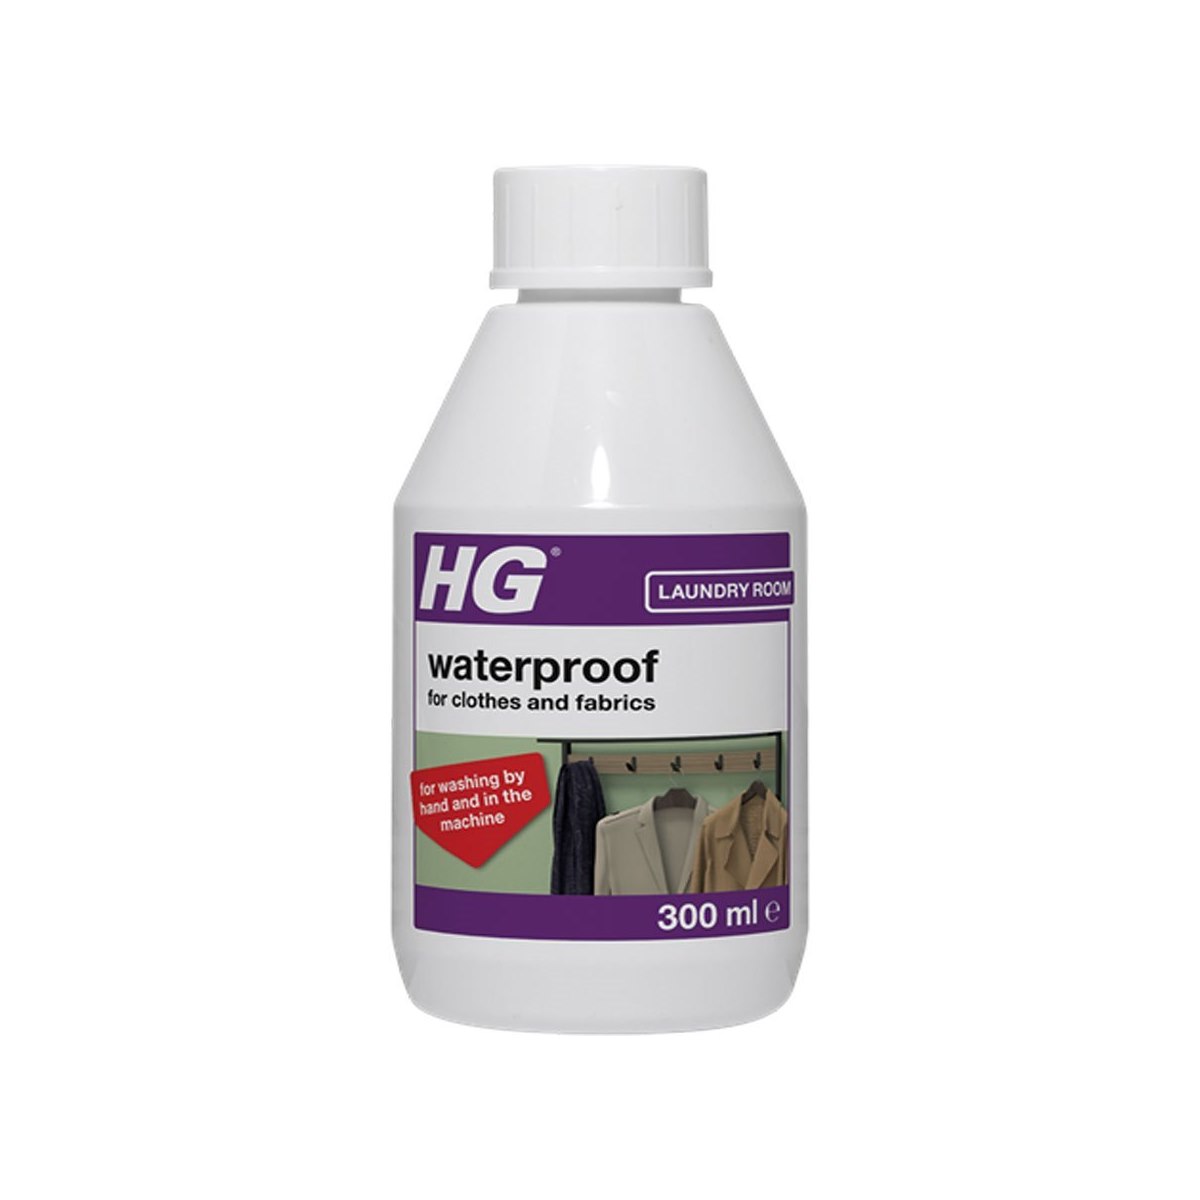 HG Waterproof for Clothing and Fabrics 300ml